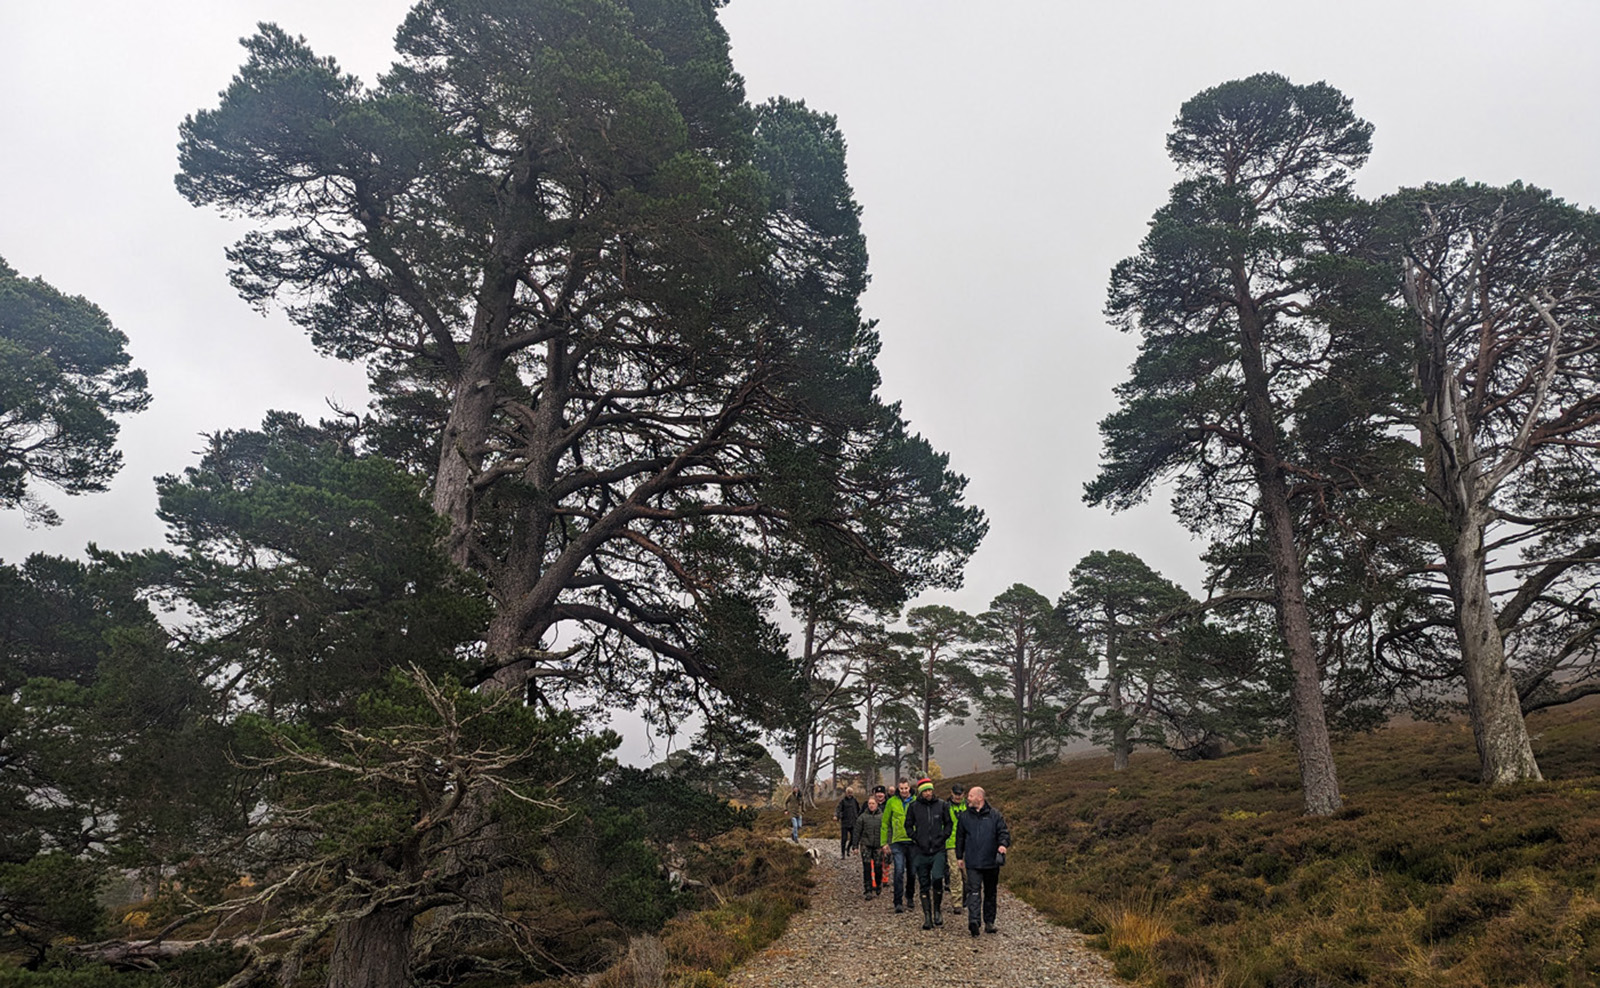 Walking amongst the pines on the Mar Lodge Estate.